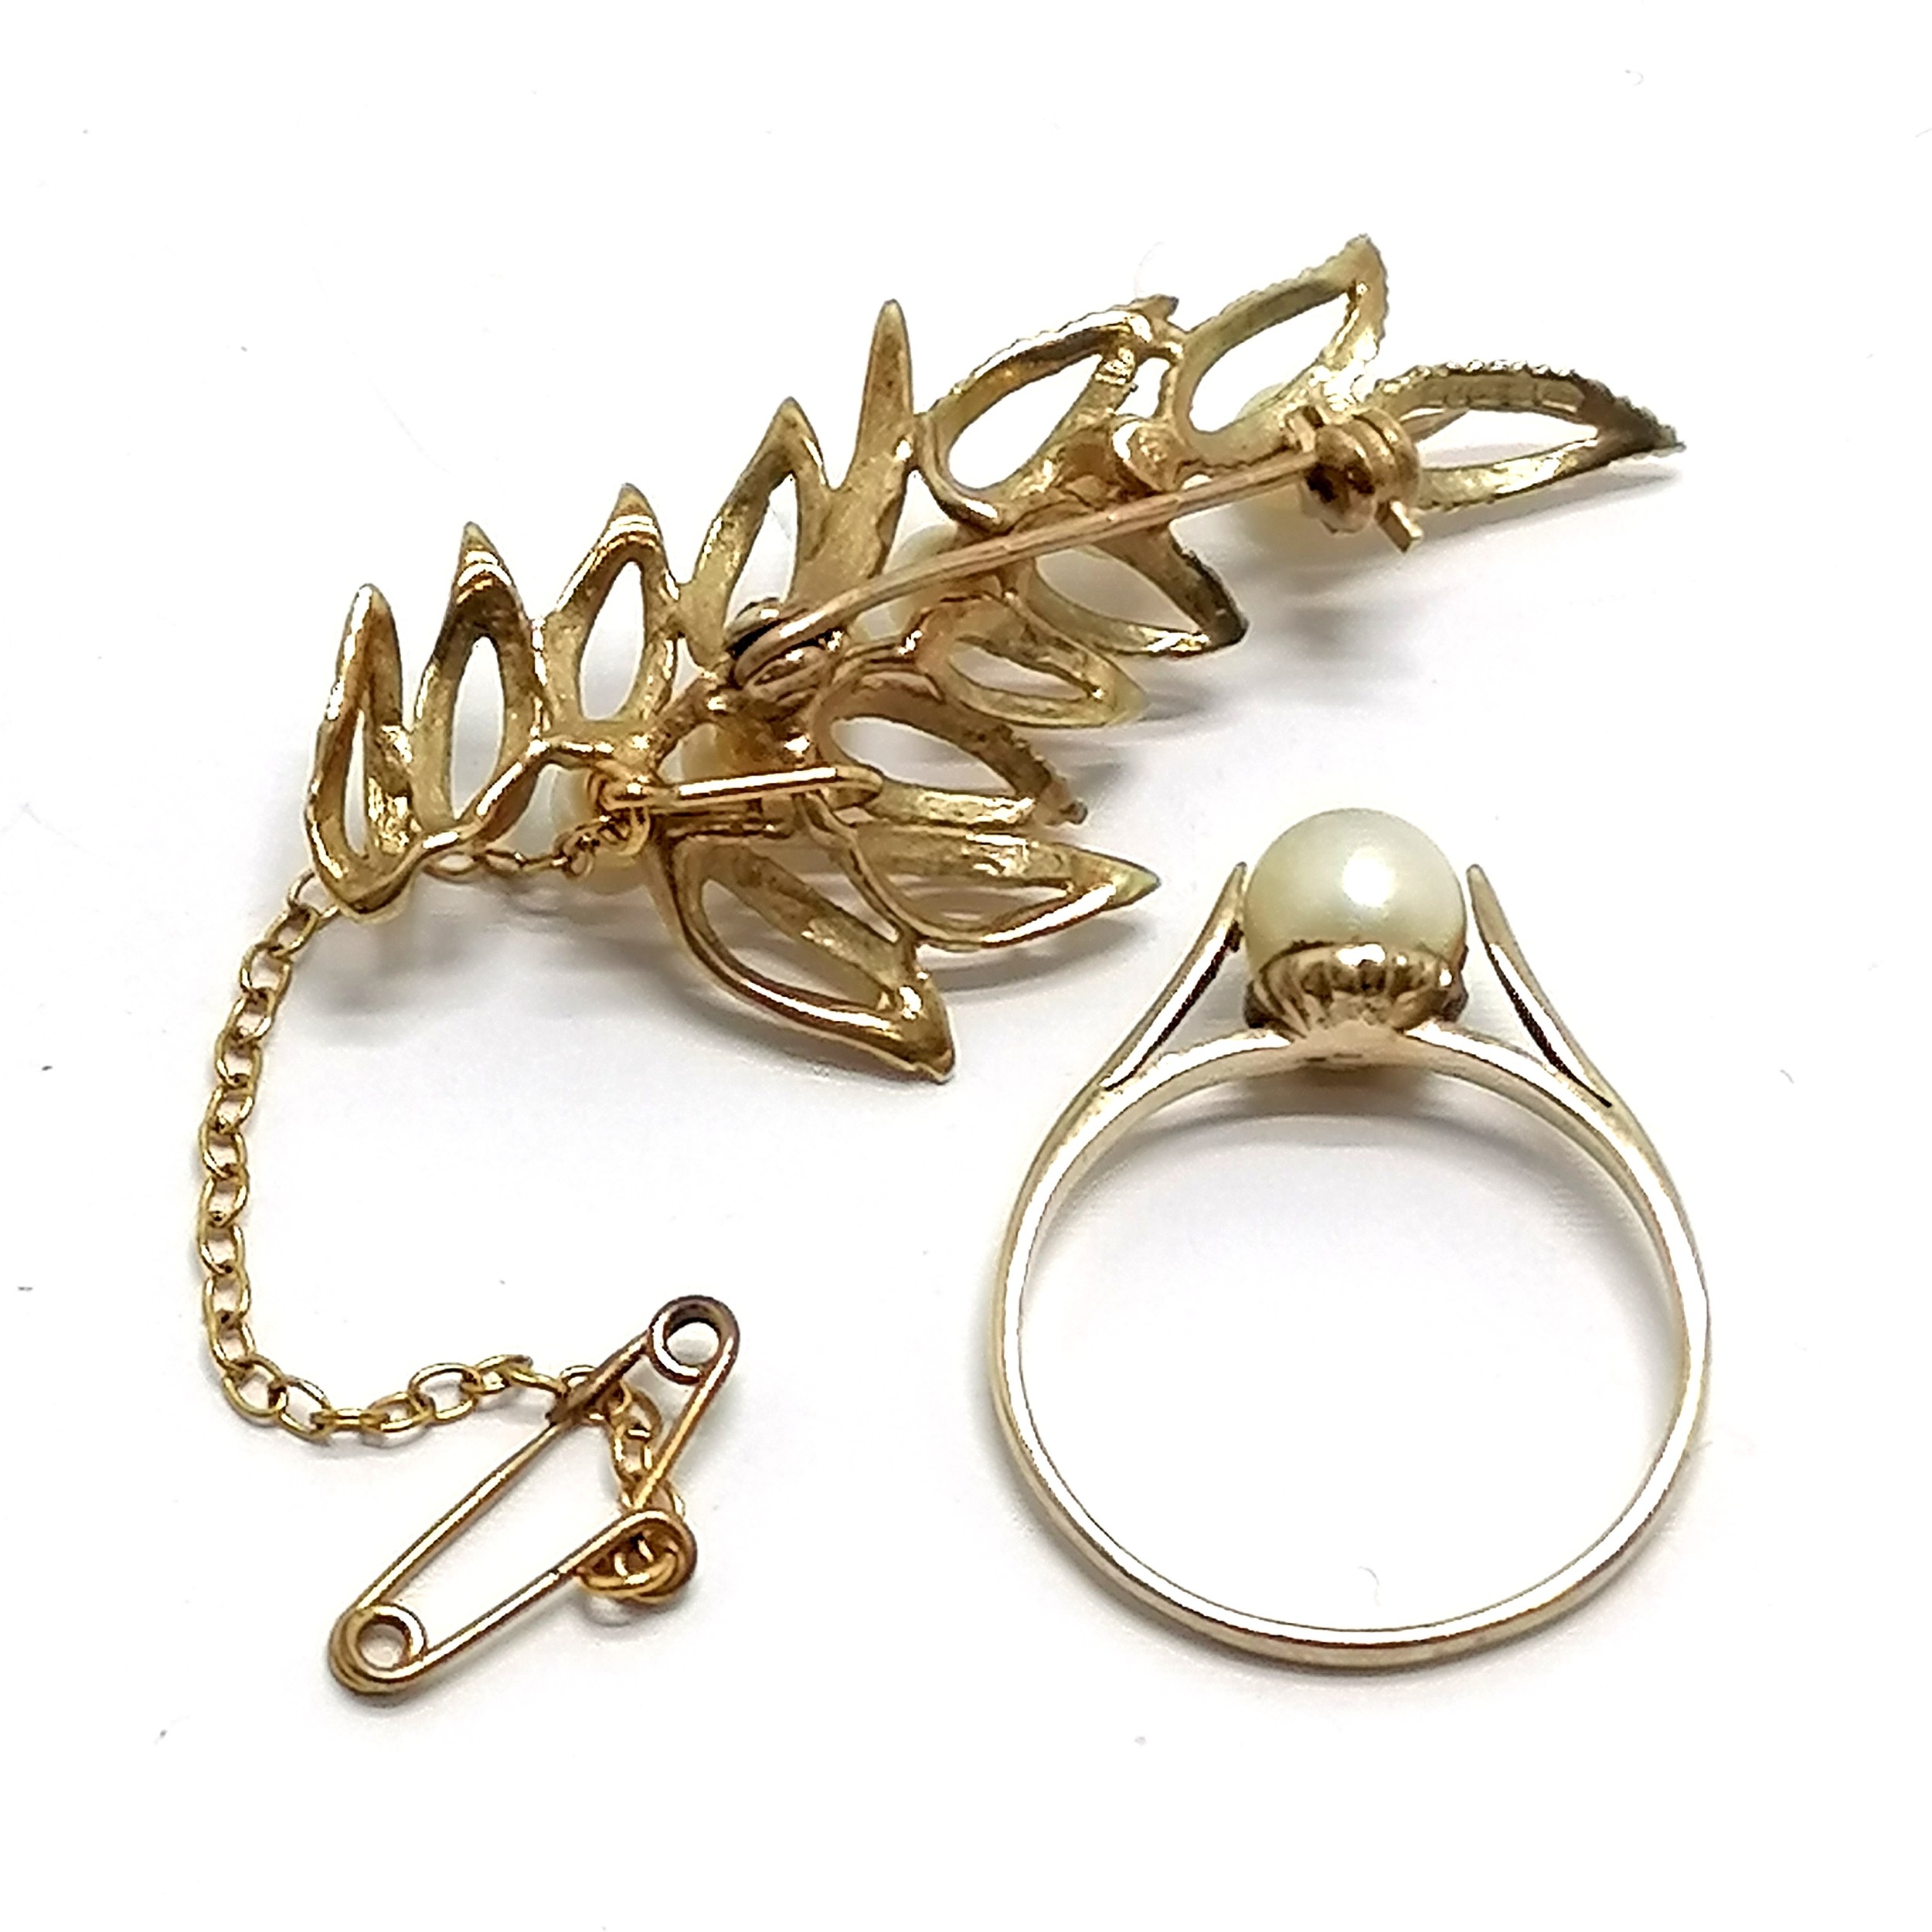 9ct hallmarked gold brooch (4.5cm) & ring (size Q½) set with pearls ~ total weight 6.4g - Image 2 of 2